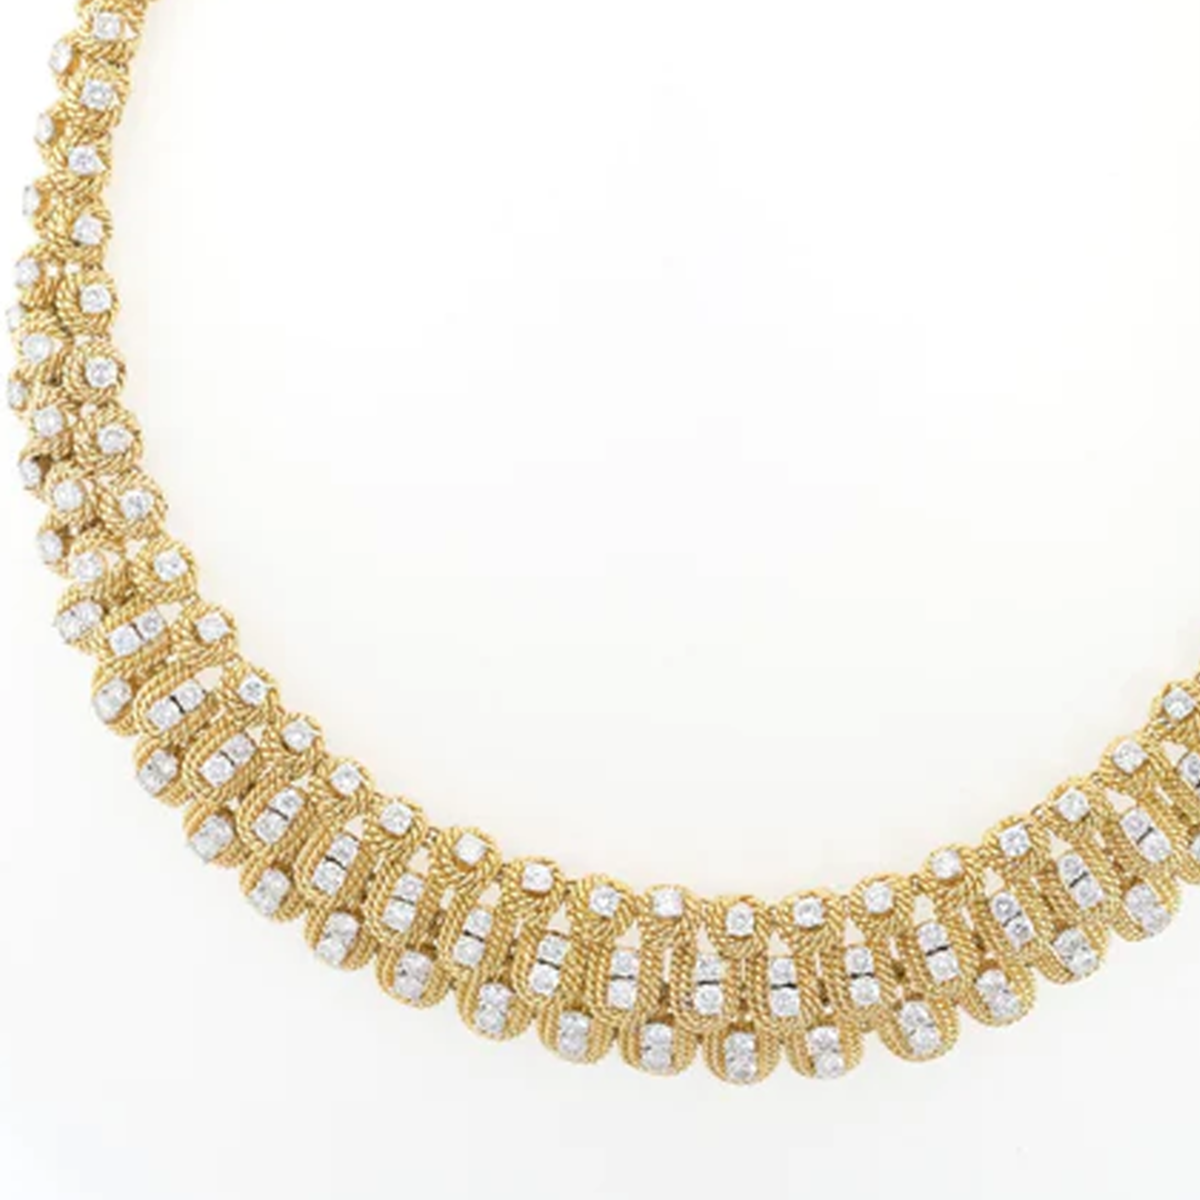 Circa 1950s 18KT Yellow Gold Diamond Rope Collar Necklace close-up front view